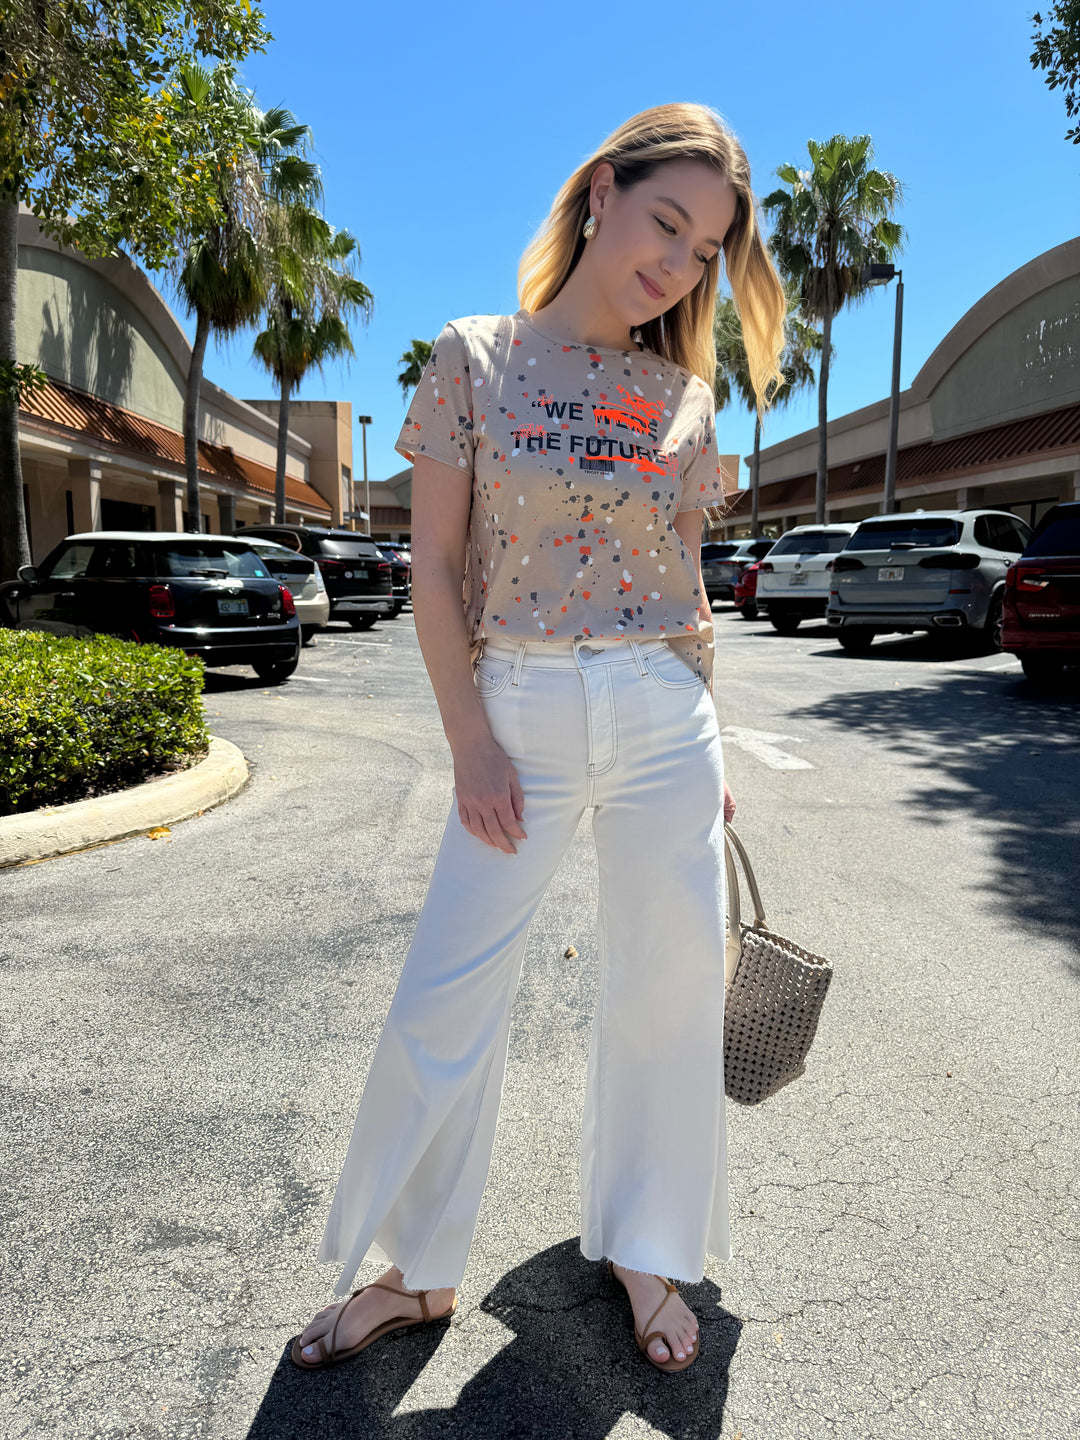 Tricot Chic Print Tee With Spot & Frame Le Palazzo Crop Jeans